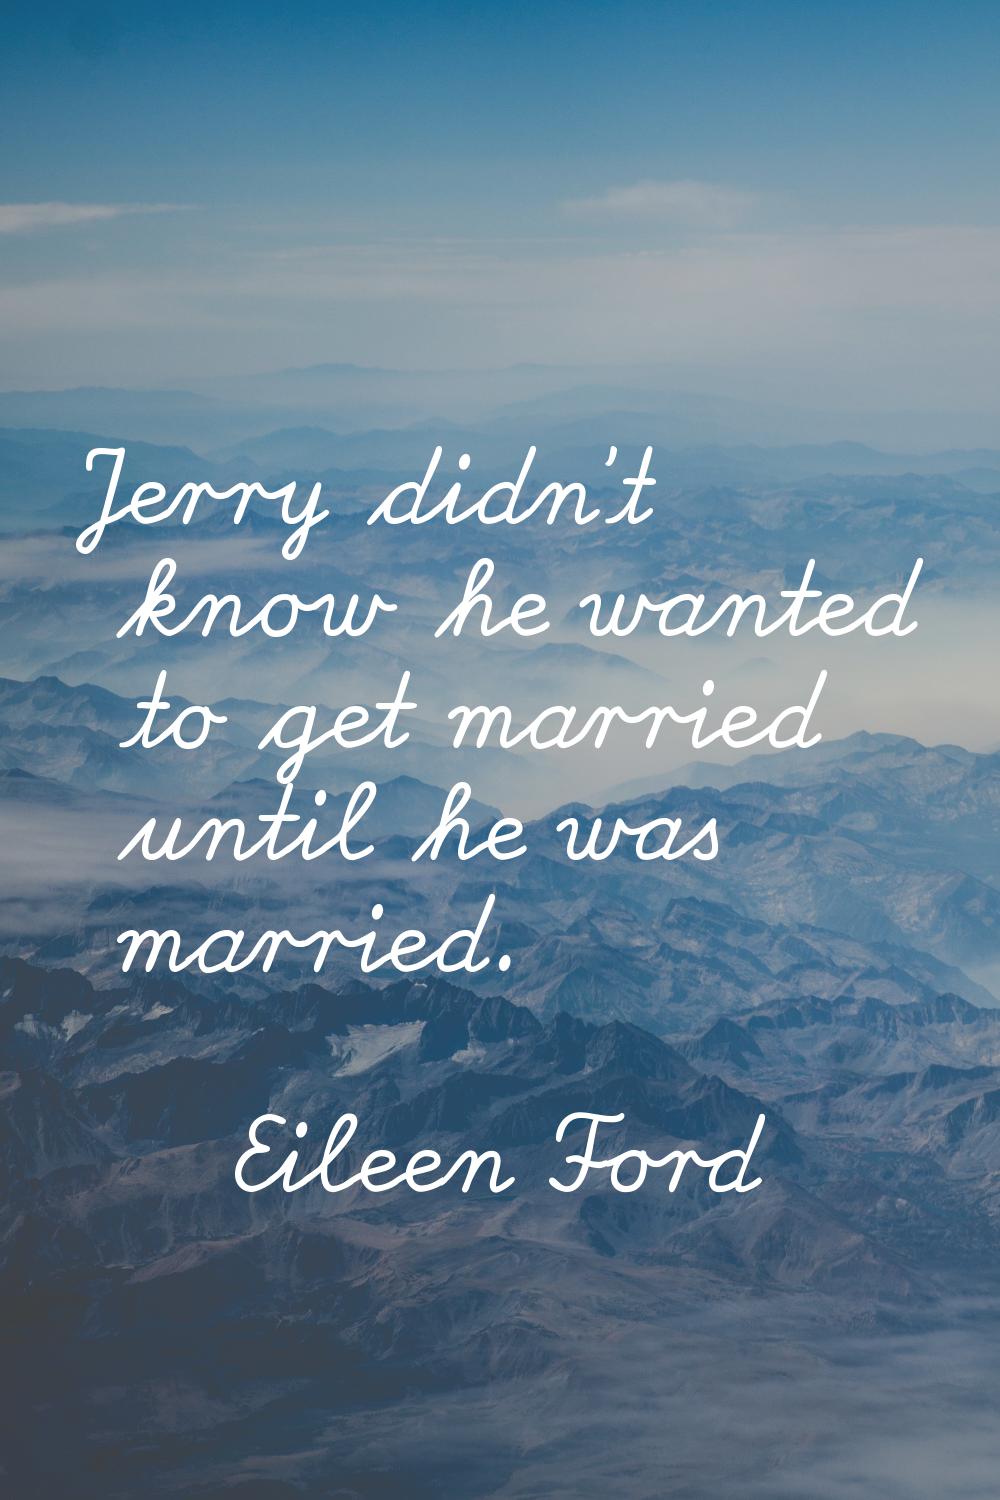 Jerry didn't know he wanted to get married until he was married.